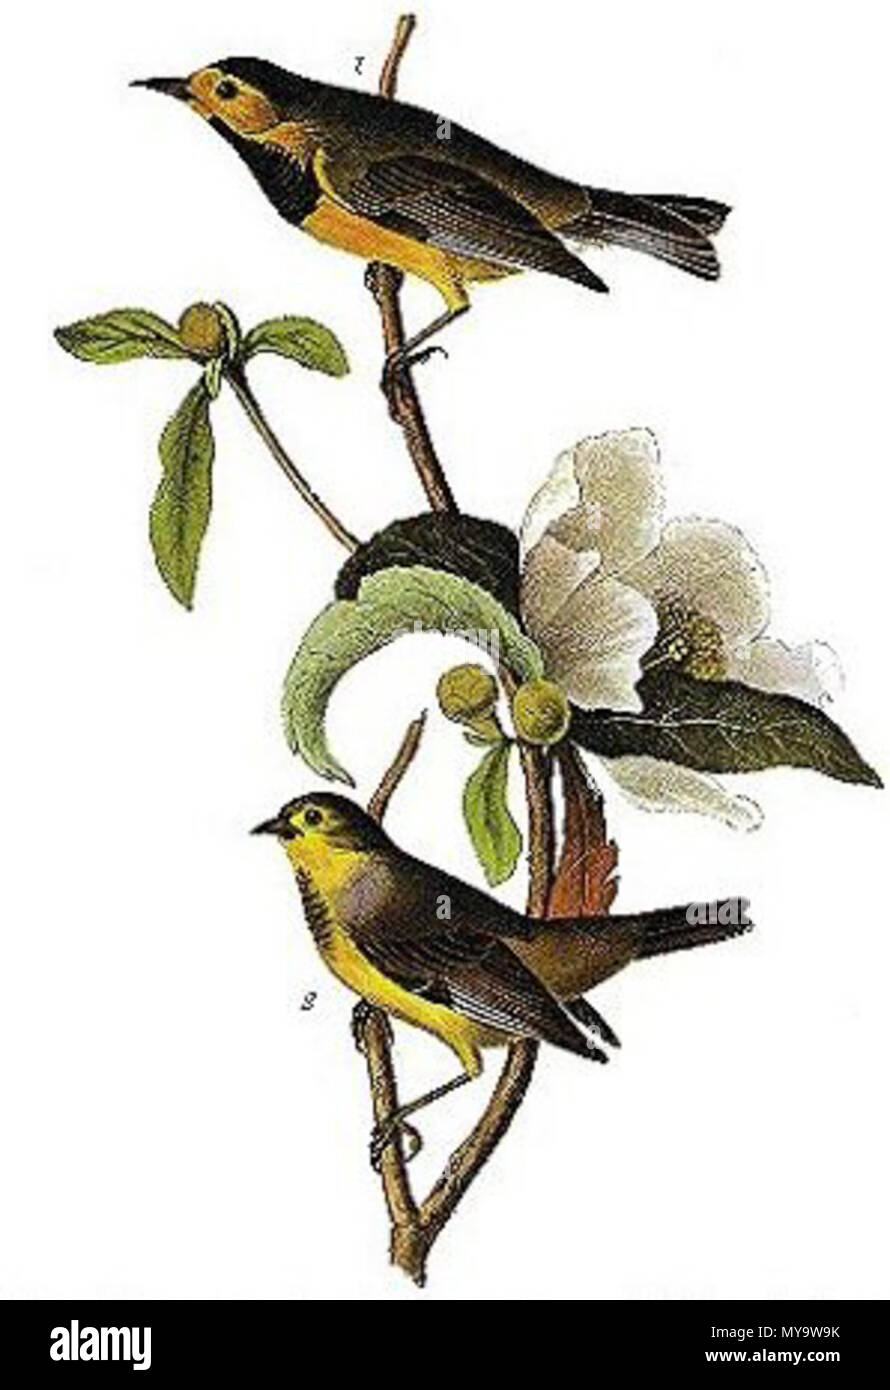 . English: Lithograph from Audubon's Birds of America . between 1927 and 1938.   John James Audubon  (1785–1851)       Alternative names Birth name: Jean-Jacques-Fougère Audubon  Description American ornithologist, naturalist, hunter and painter  Date of birth/death 26 April 1785 27 January 1851  Location of birth/death Les Cayes (Haiti) New York City  Work location Louisville, New Orleans, New York City, Florida  Authority control  : Q182882 VIAF: 14765625 ISNI: 0000 0001 1040 5229 ULAN: 500016578 LCCN: n79018677 NLA: 35010139 WorldCat 58 Bachman Swamp Warbler Stock Photo